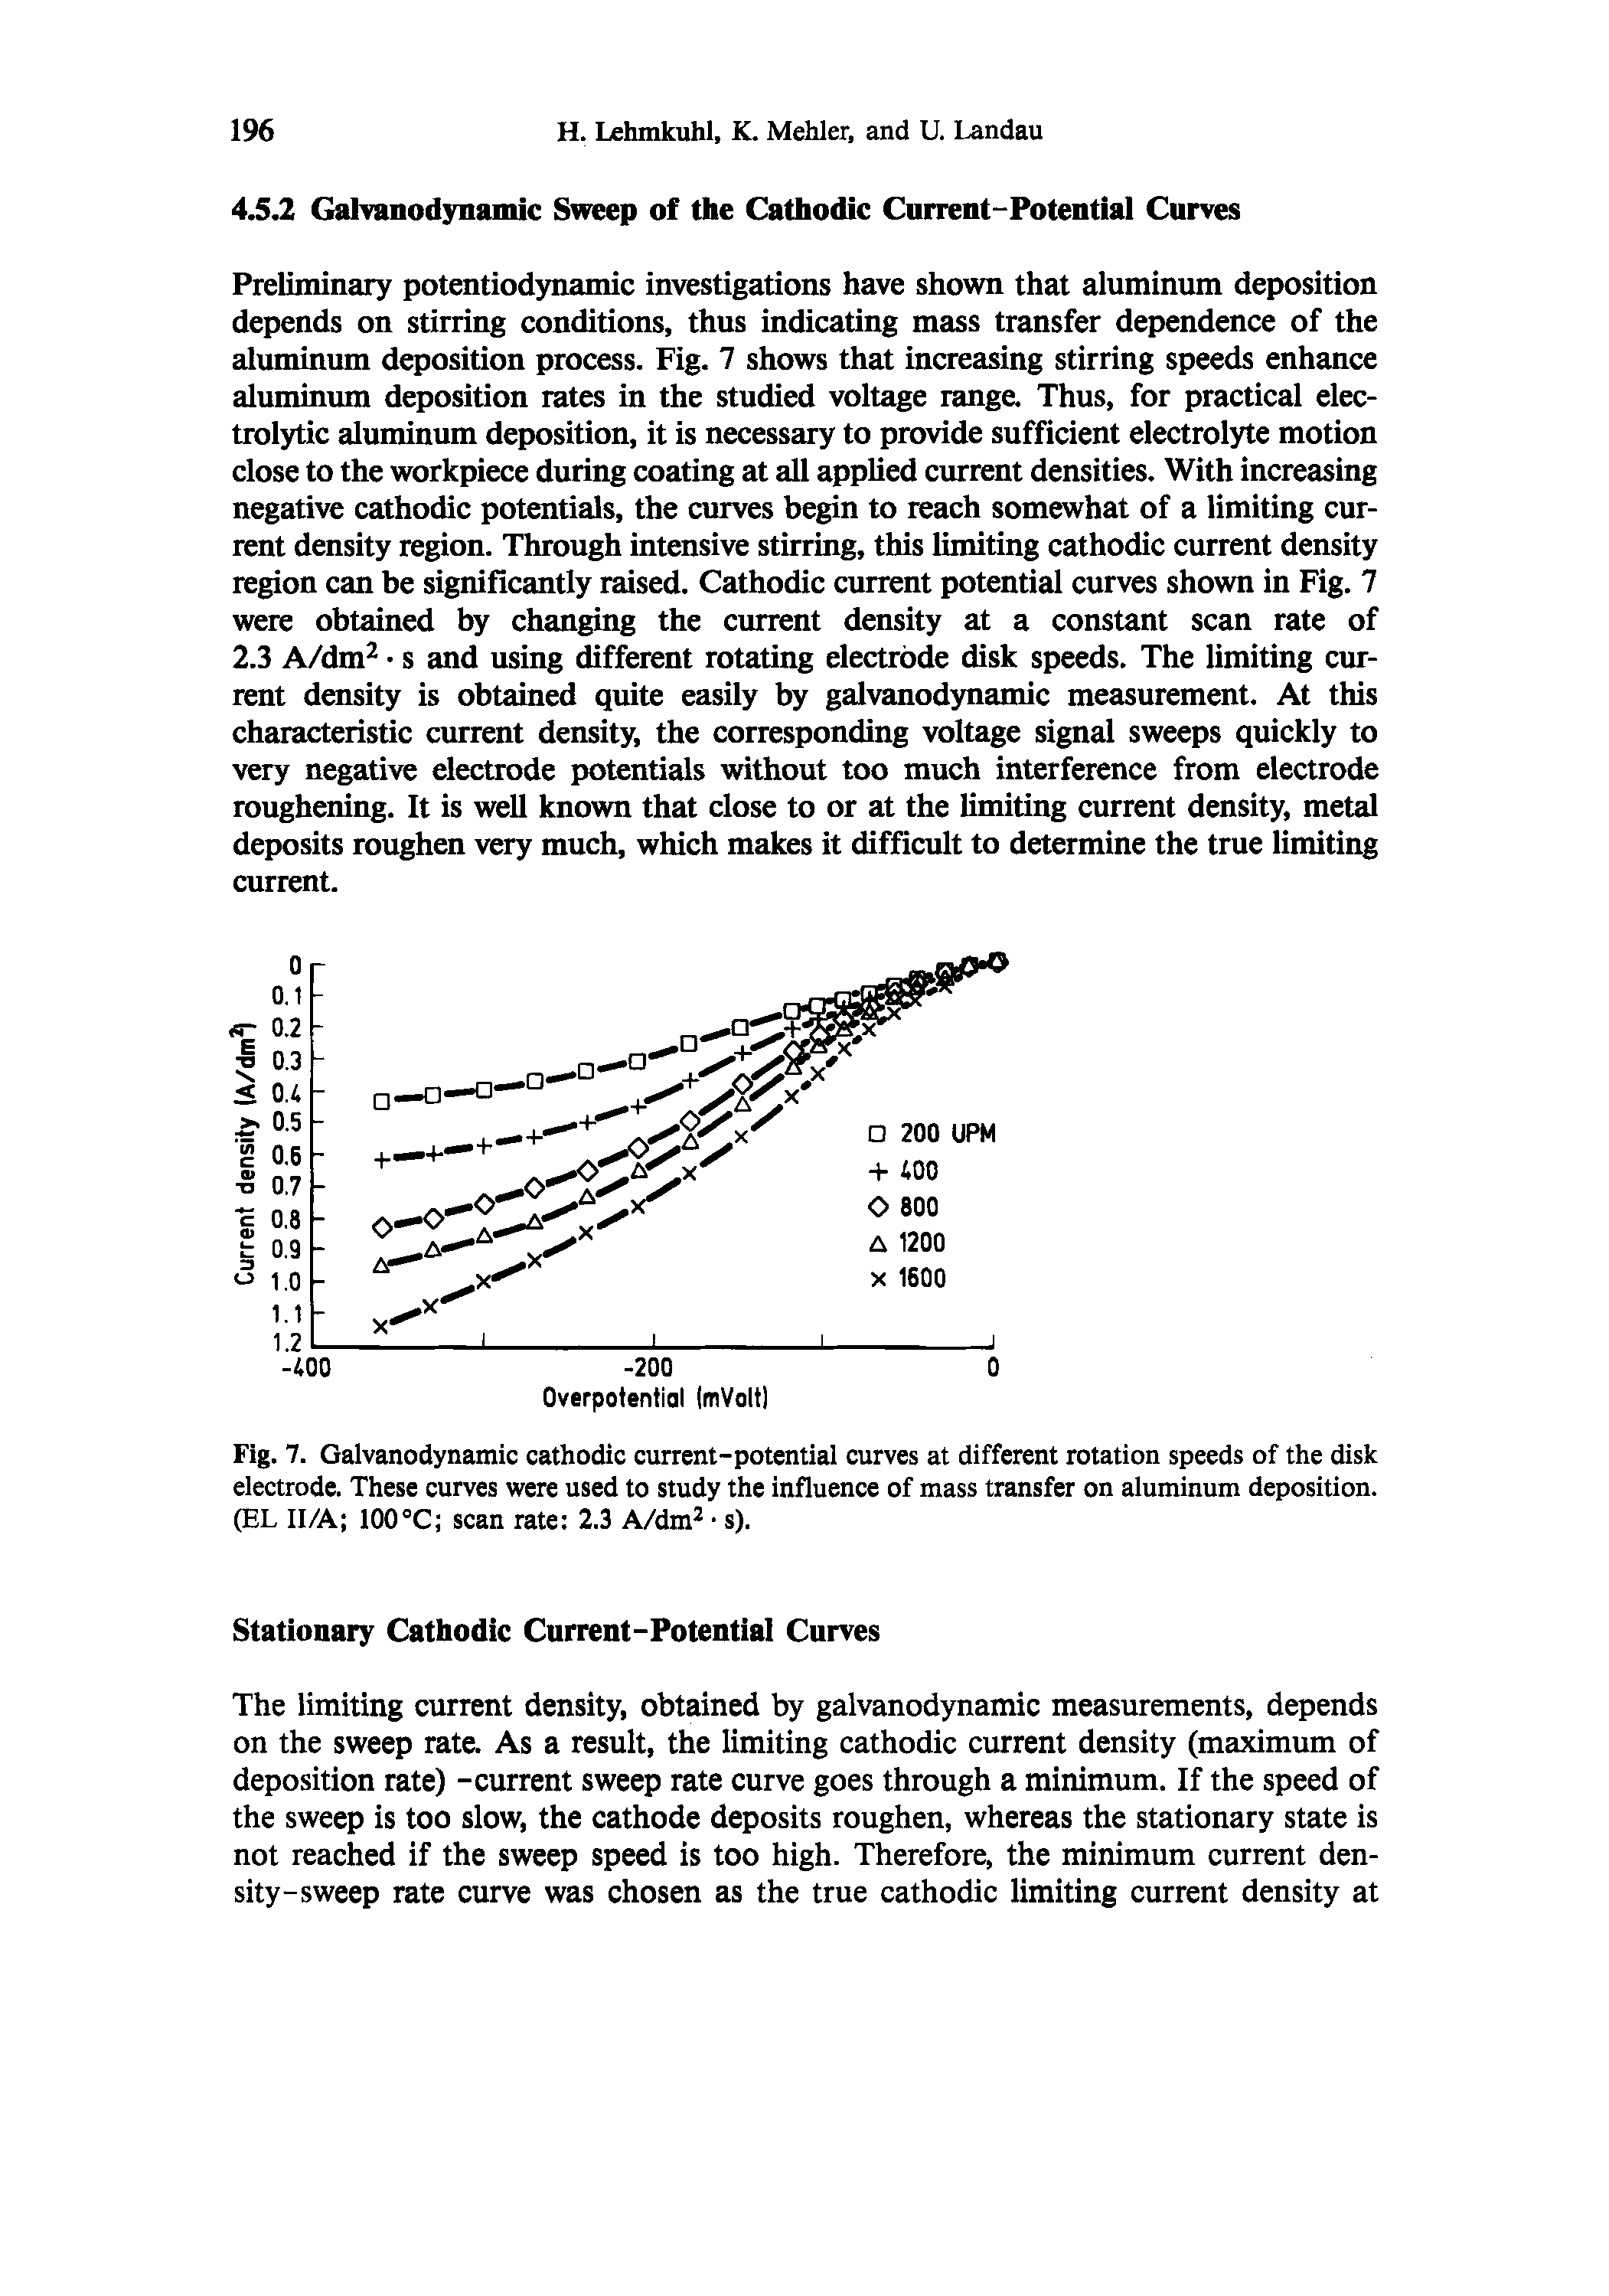 Fig. 7. Galvanodynamic cathodic current-potential curves at different rotation speeds of the disk electrode. These curves were used to study the Influence of mass transfer on aluminum deposition. (EL II/A 100°C scan rate 2.3 A/dm s).